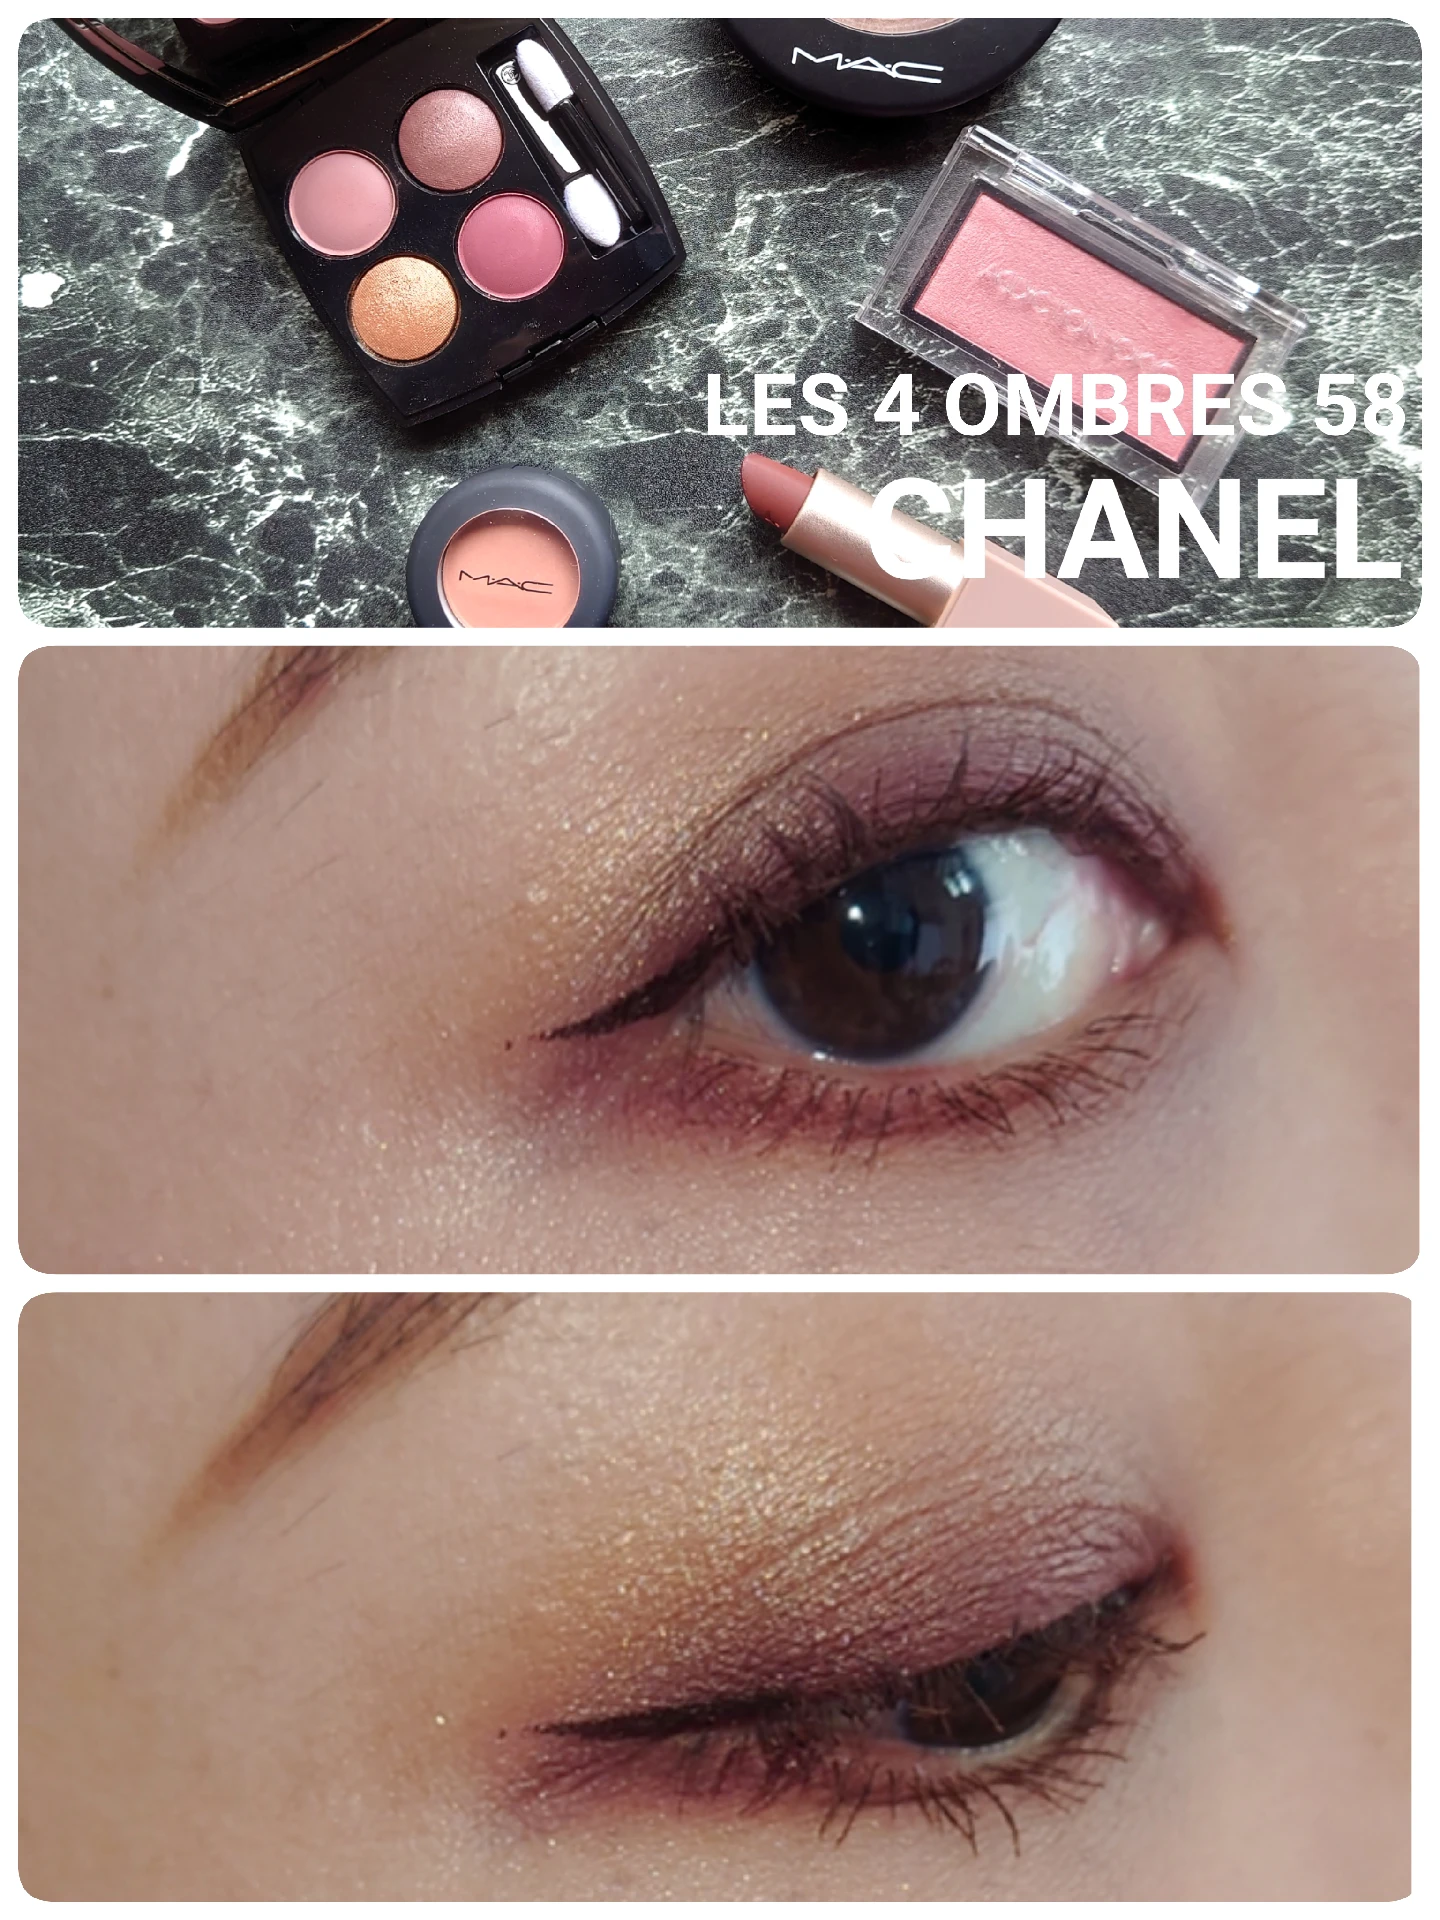 Chanel Eye Makeup Chart: How to Wear Chanel Les 4 Ombres Eye Shadow